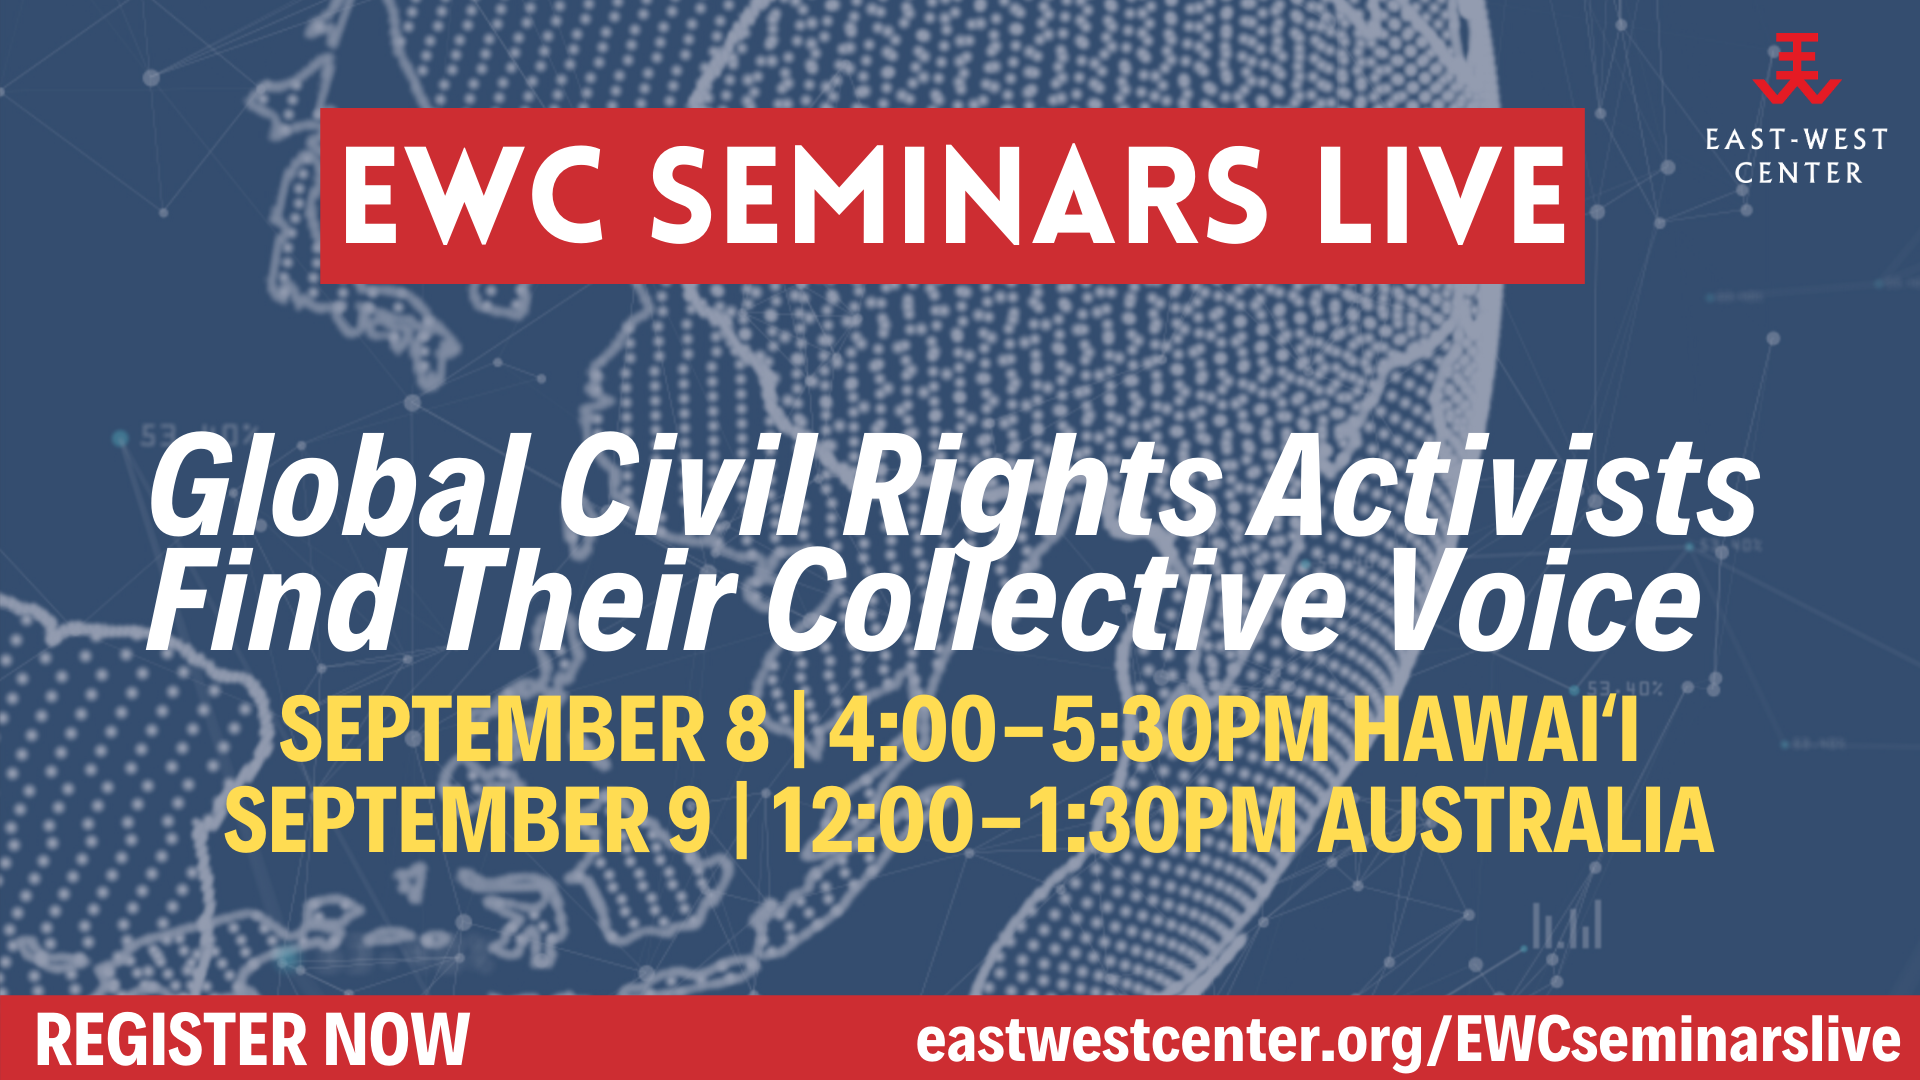 EWC Seminars Live Global Civil Rights Activists Find Their Collective